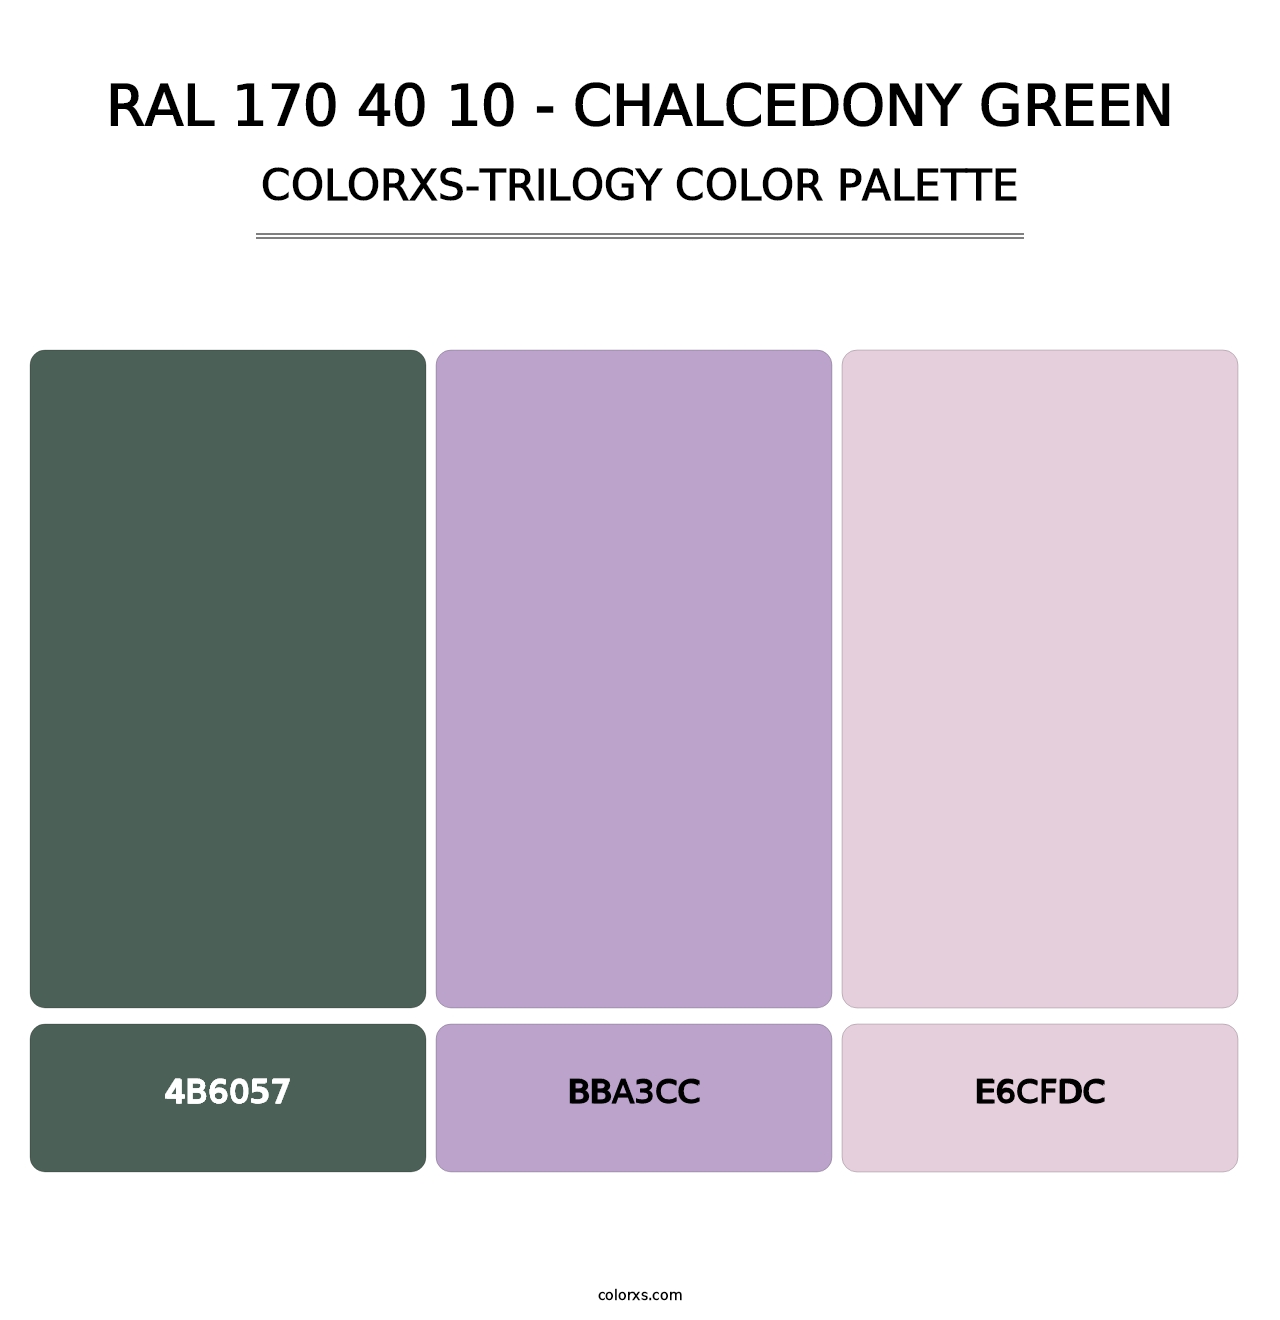 RAL 170 40 10 - Chalcedony Green - Colorxs Trilogy Palette